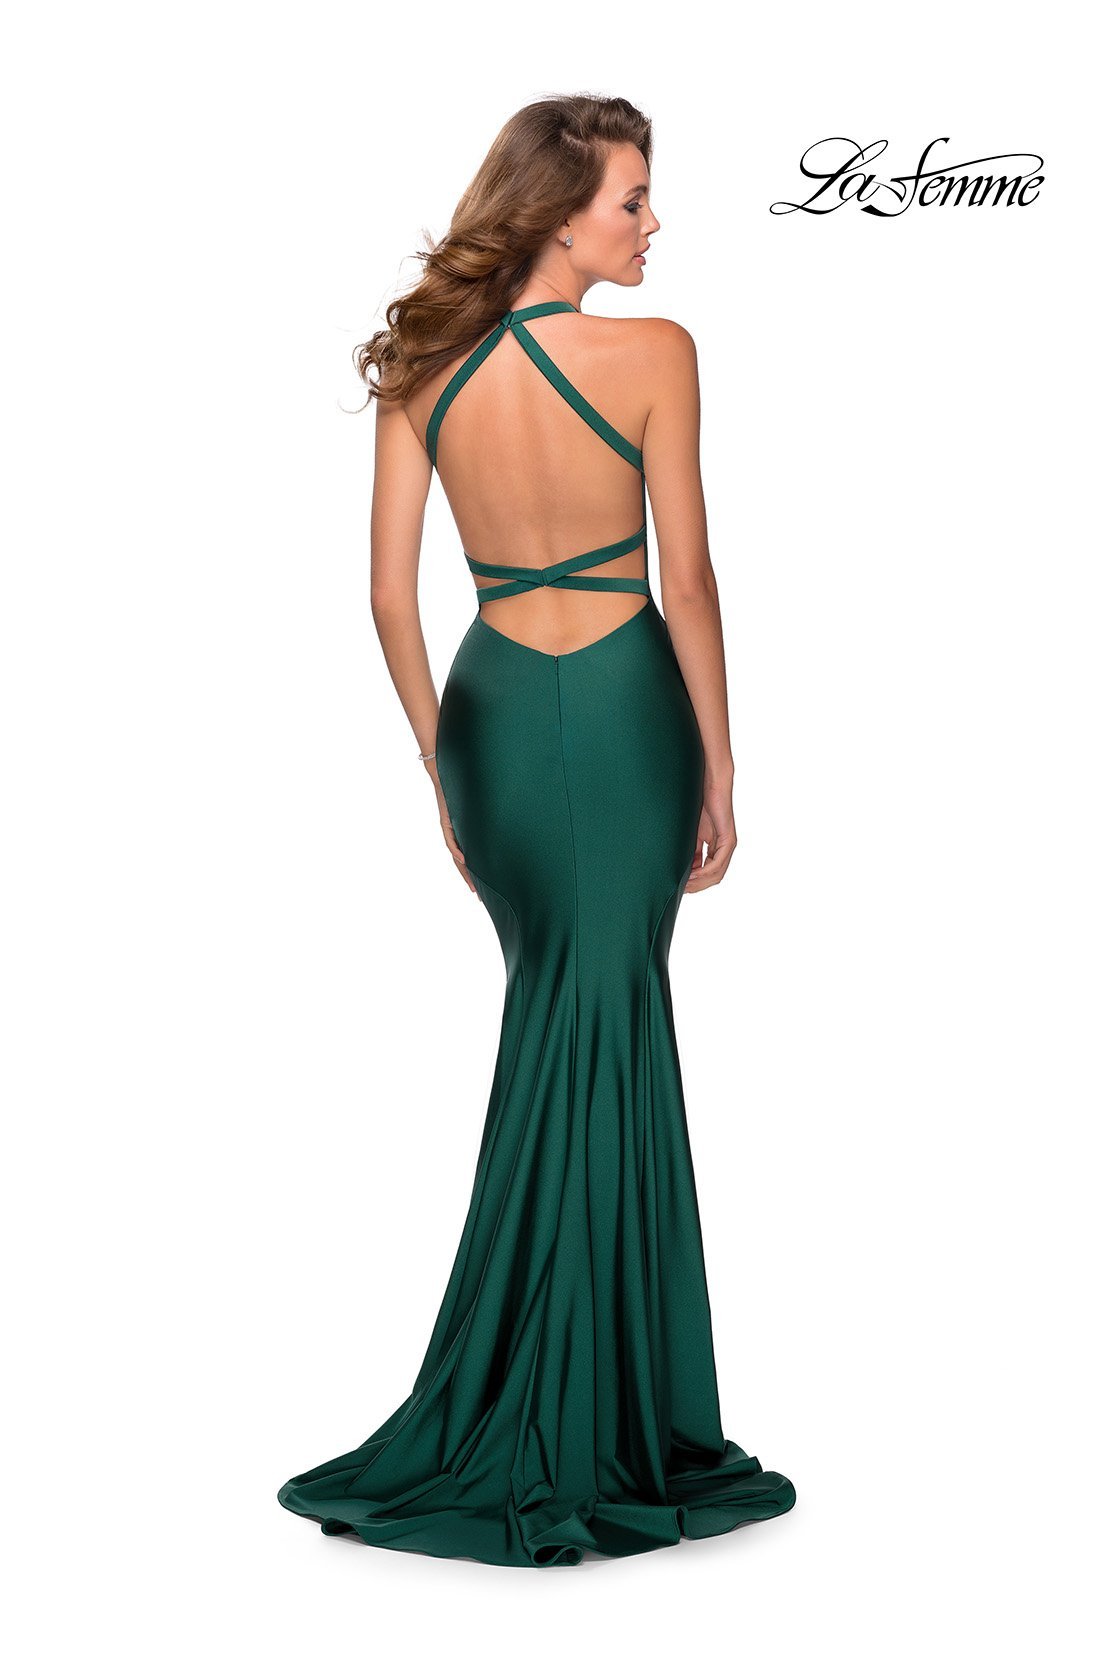 La Femme 28579 dress images in these colors: Emerald, Navy, Royal Purple.